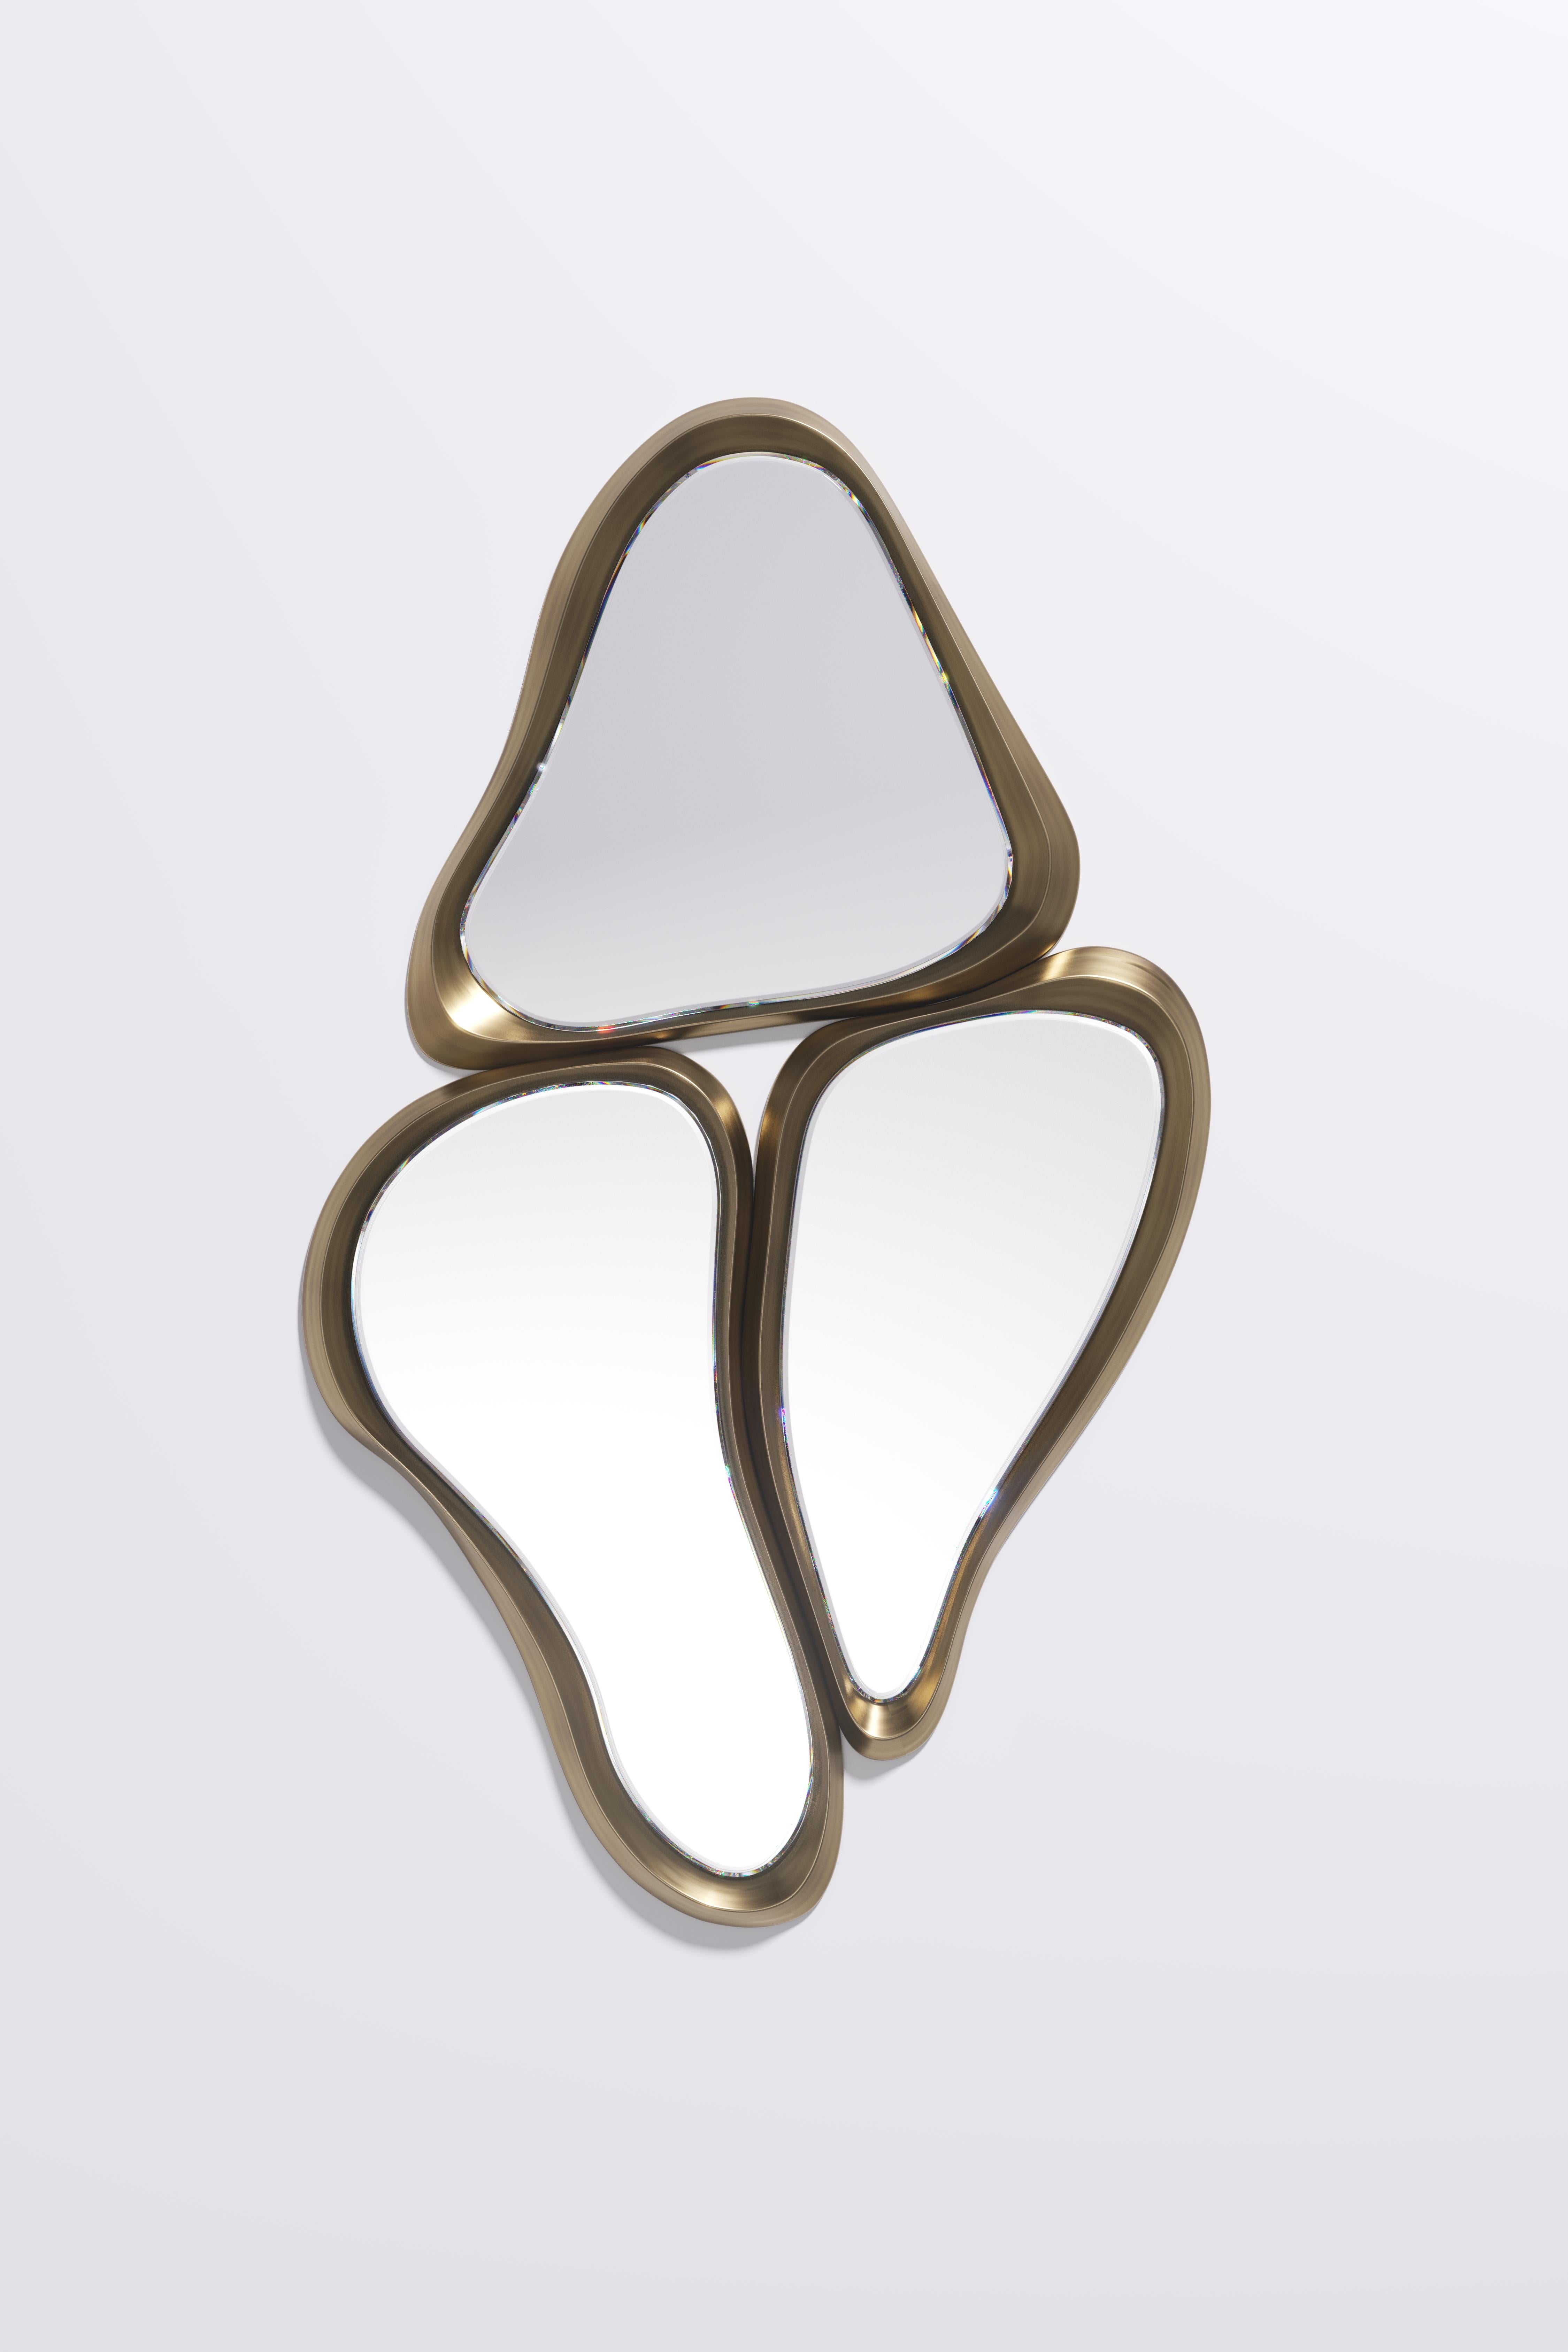 Sculptural Mirror in Cream Shagreen and Bronze-Patina Brass by Kifu Paris In New Condition For Sale In New York, NY